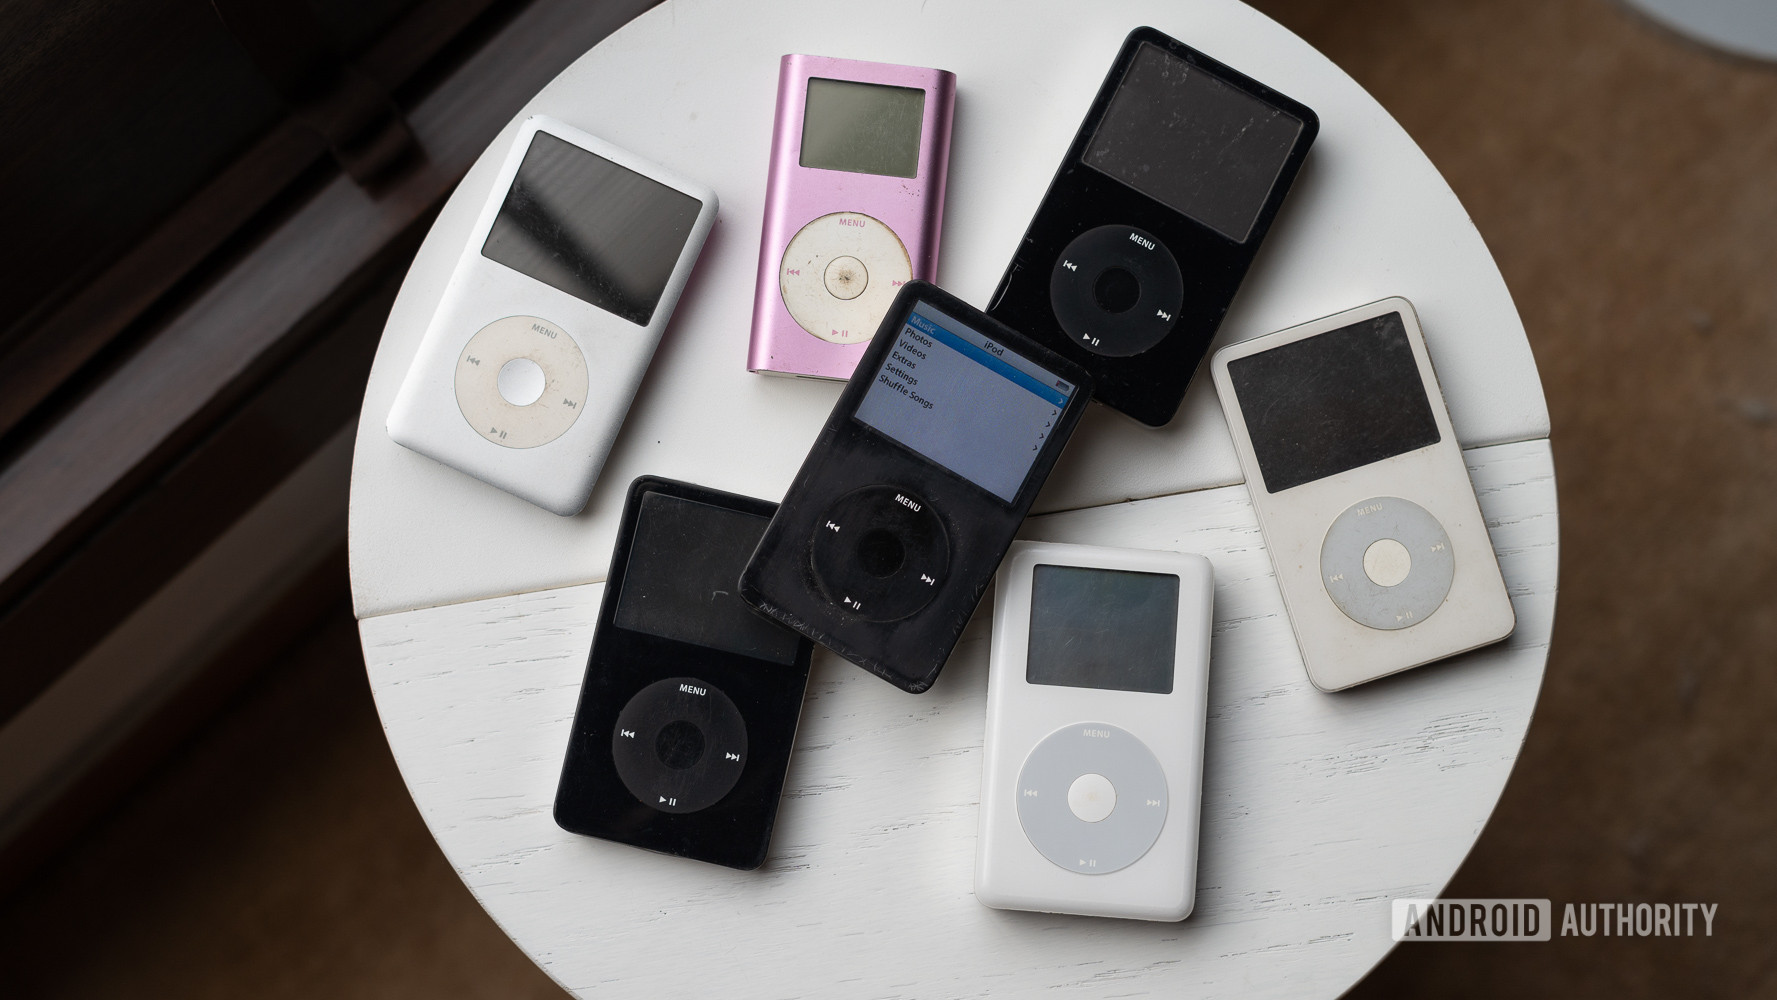 androidauthority.com - Ode to the Apple iPod: The golden era of portable music